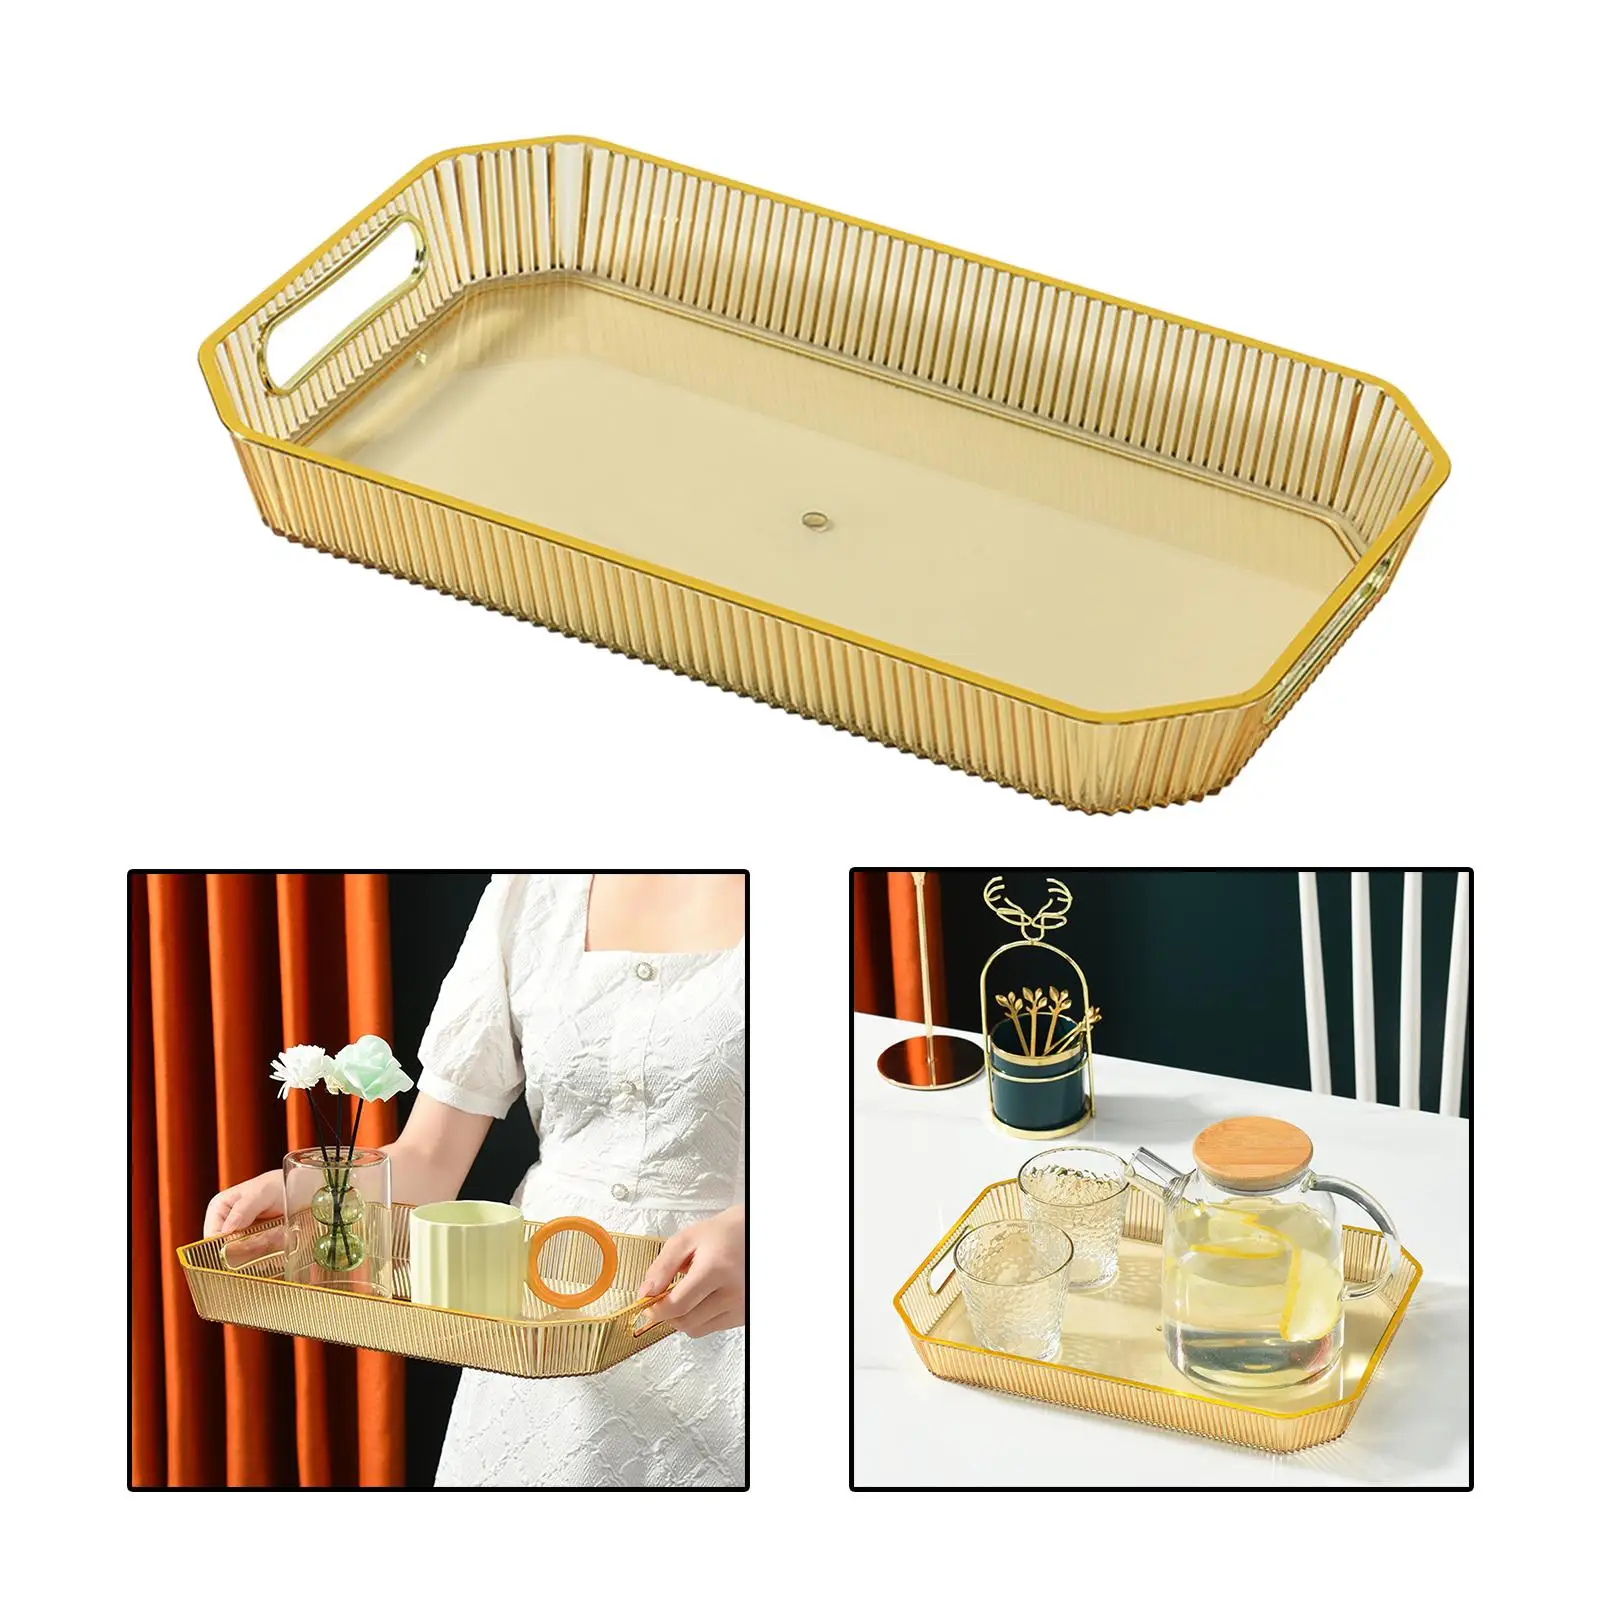 Modern Cosmetic Storage with Handles Jewelry Tray for Coffee Table Eating Breakfast Countertop Bathroom Living Room